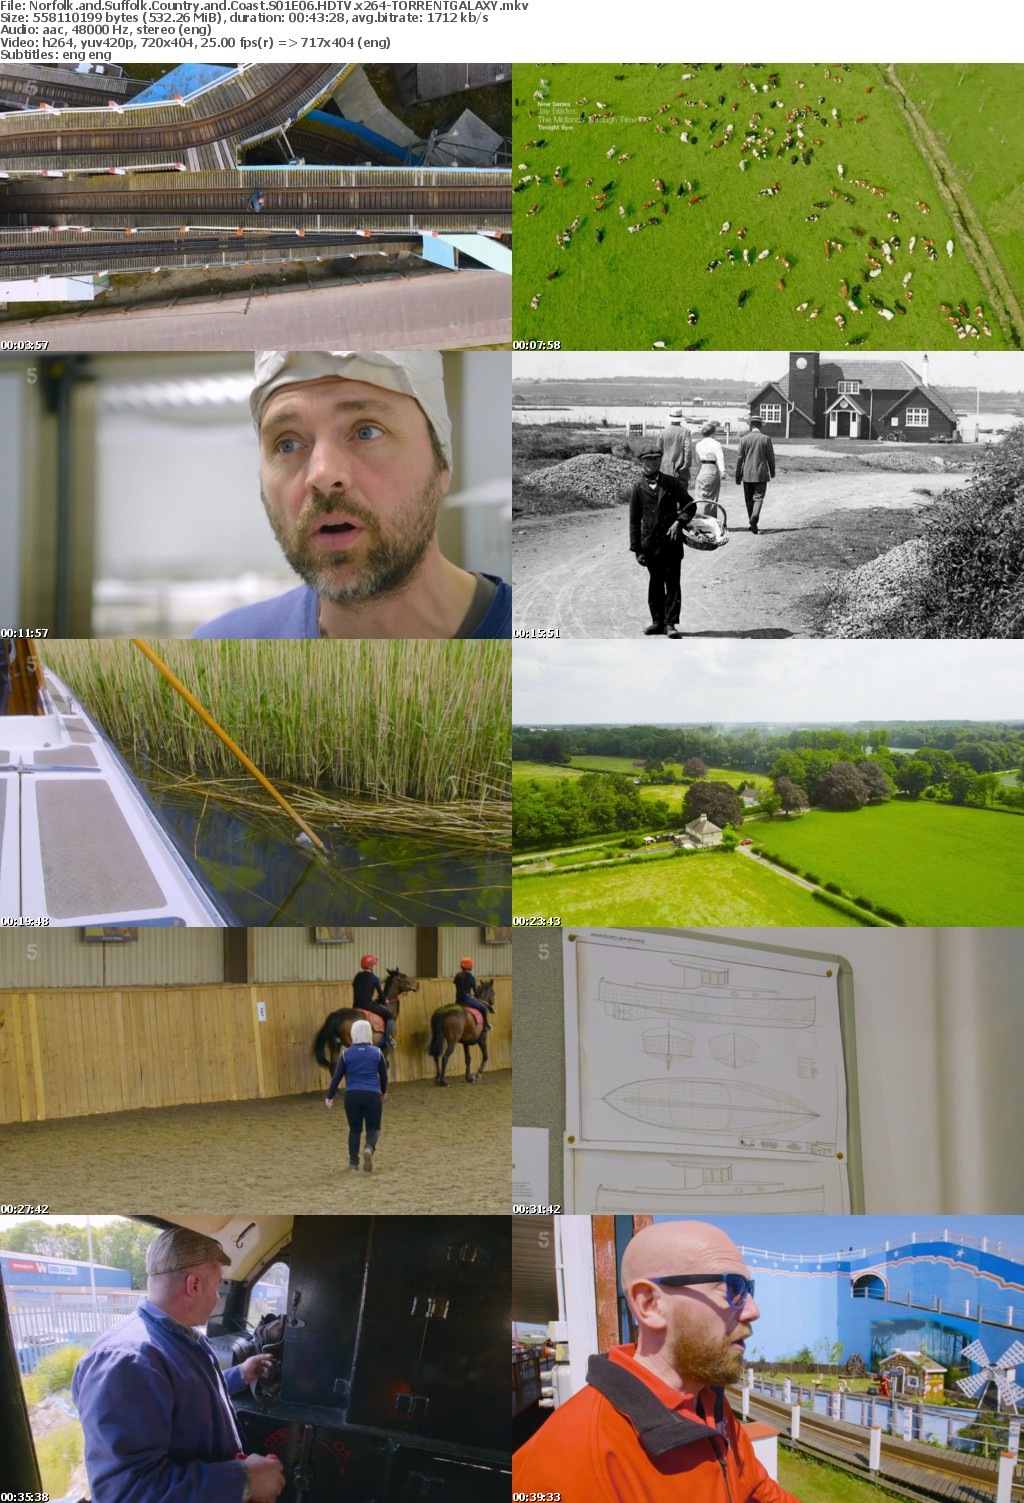 Norfolk and Suffolk Country and Coast S01E06 HDTV x264-GALAXY